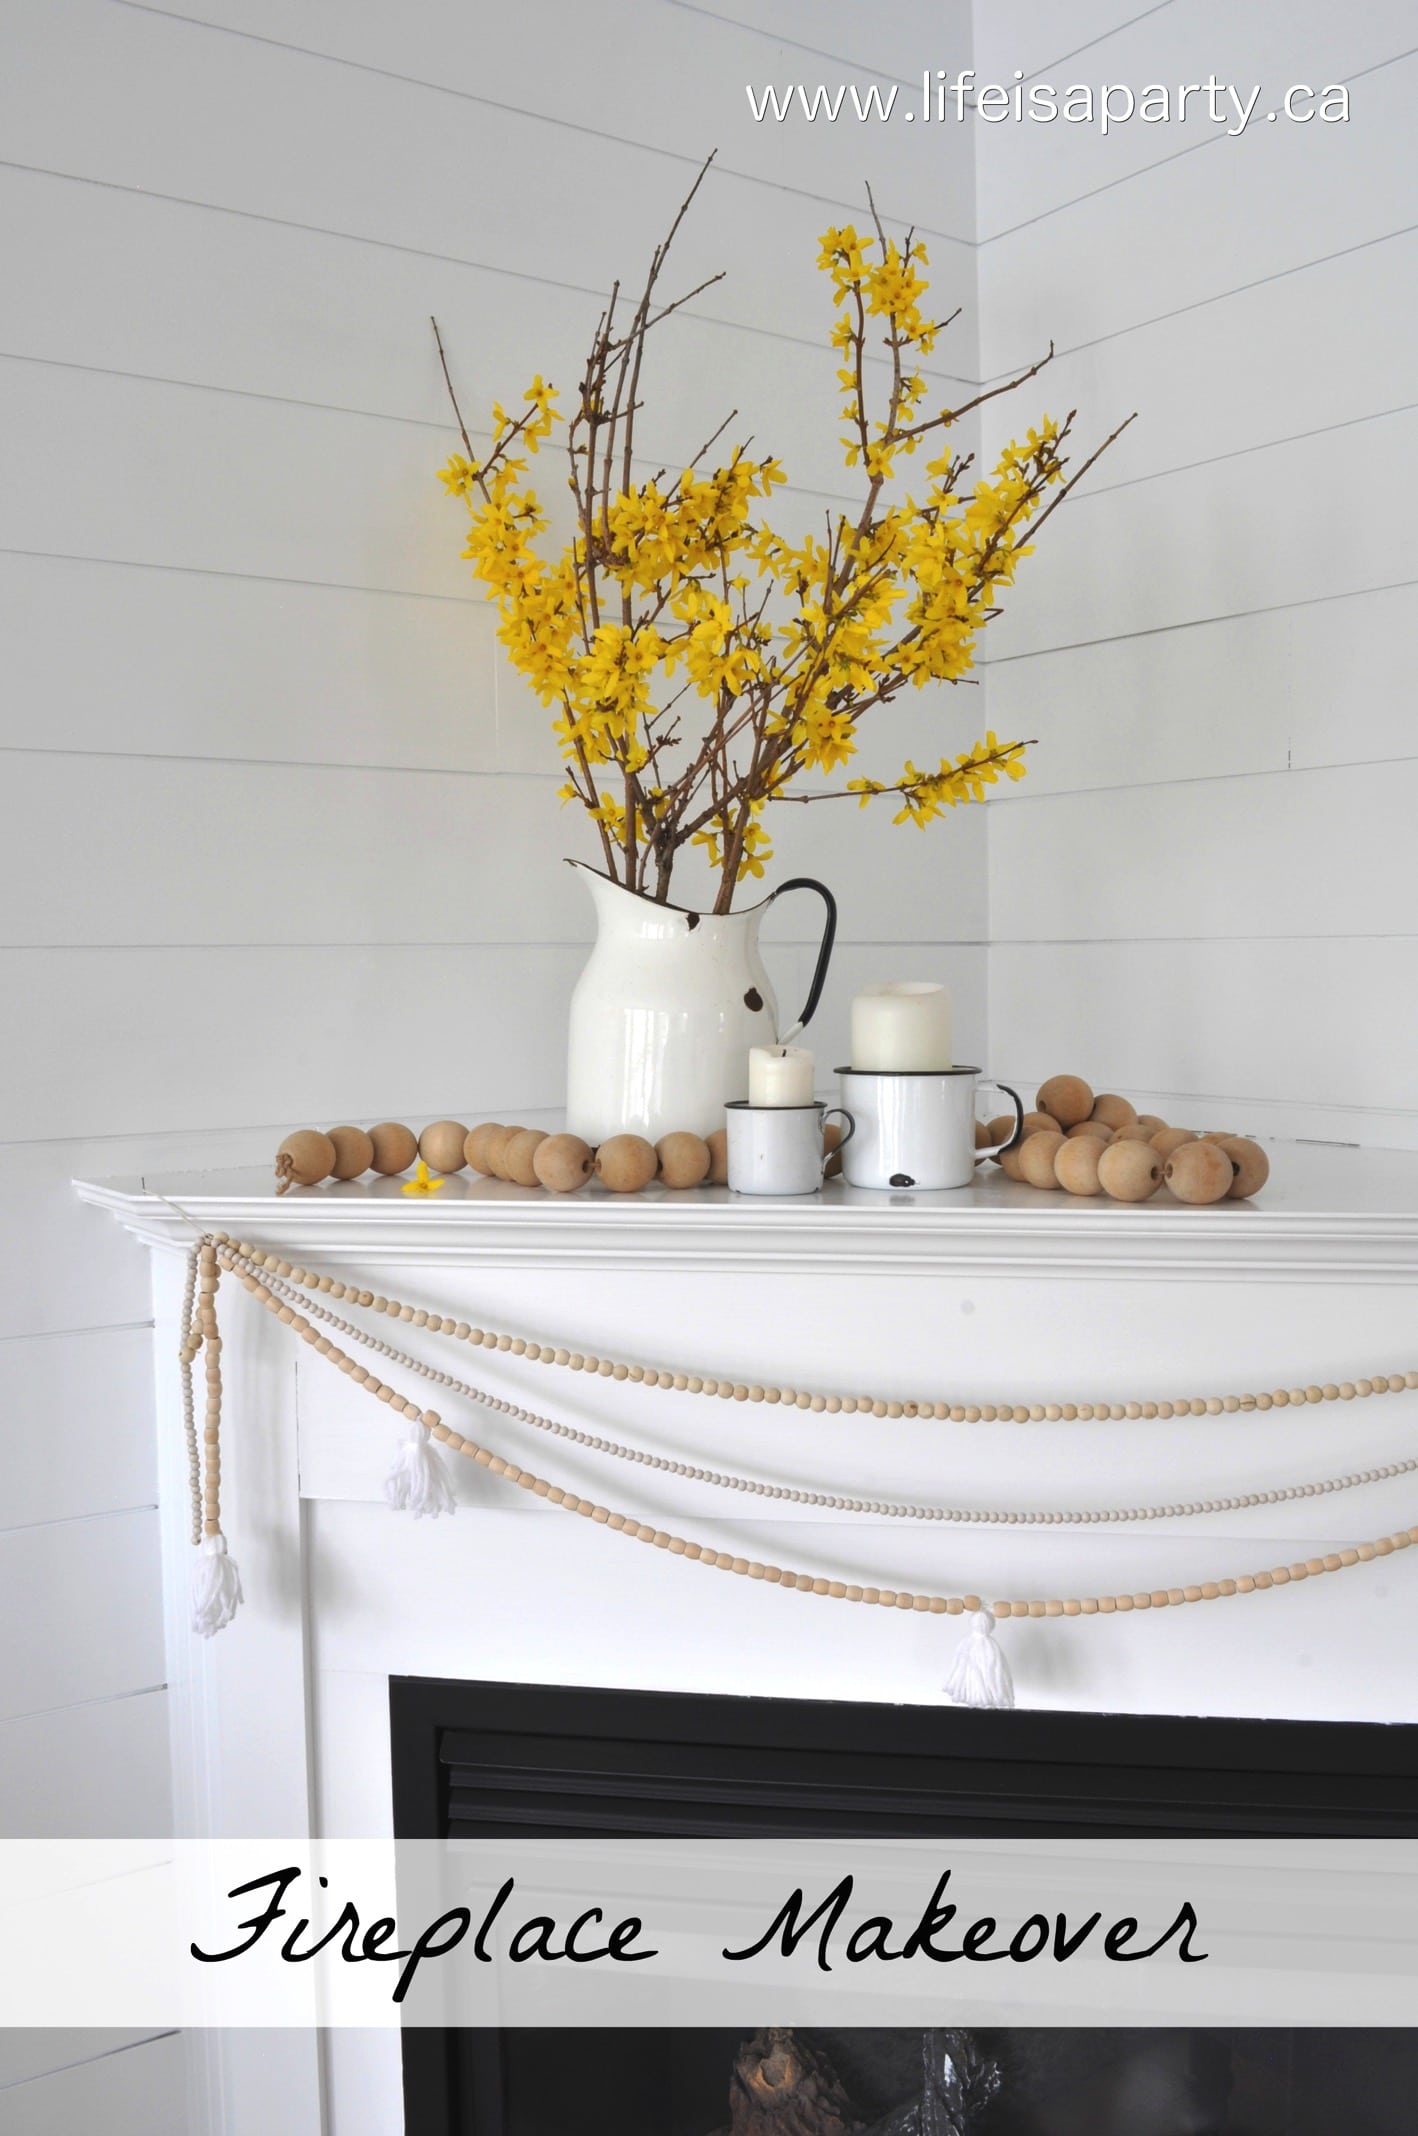 Easy Fireplace Makeover -how to remove a dated wooden decal, paint out your brass and modernize your builder basic fireplace.